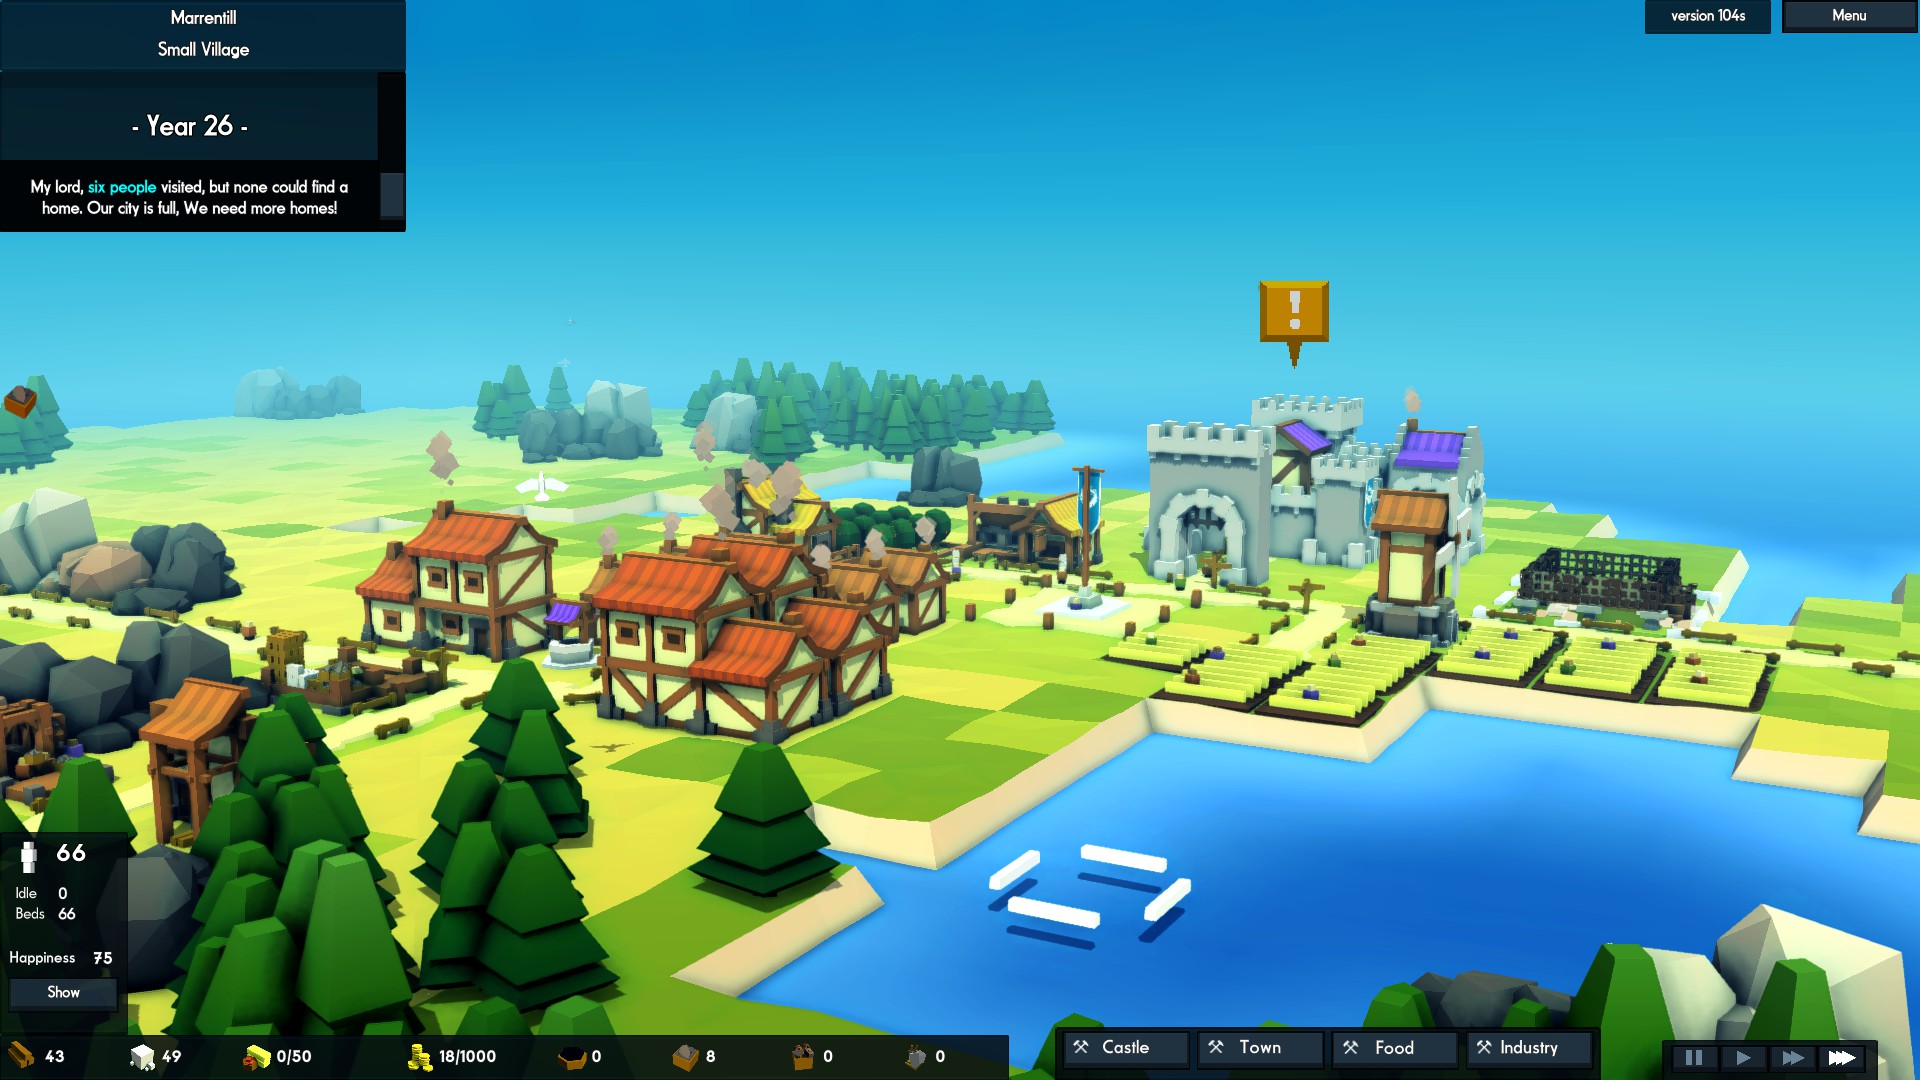 Kingdoms And Castles Is A Very Fun City-Building Game